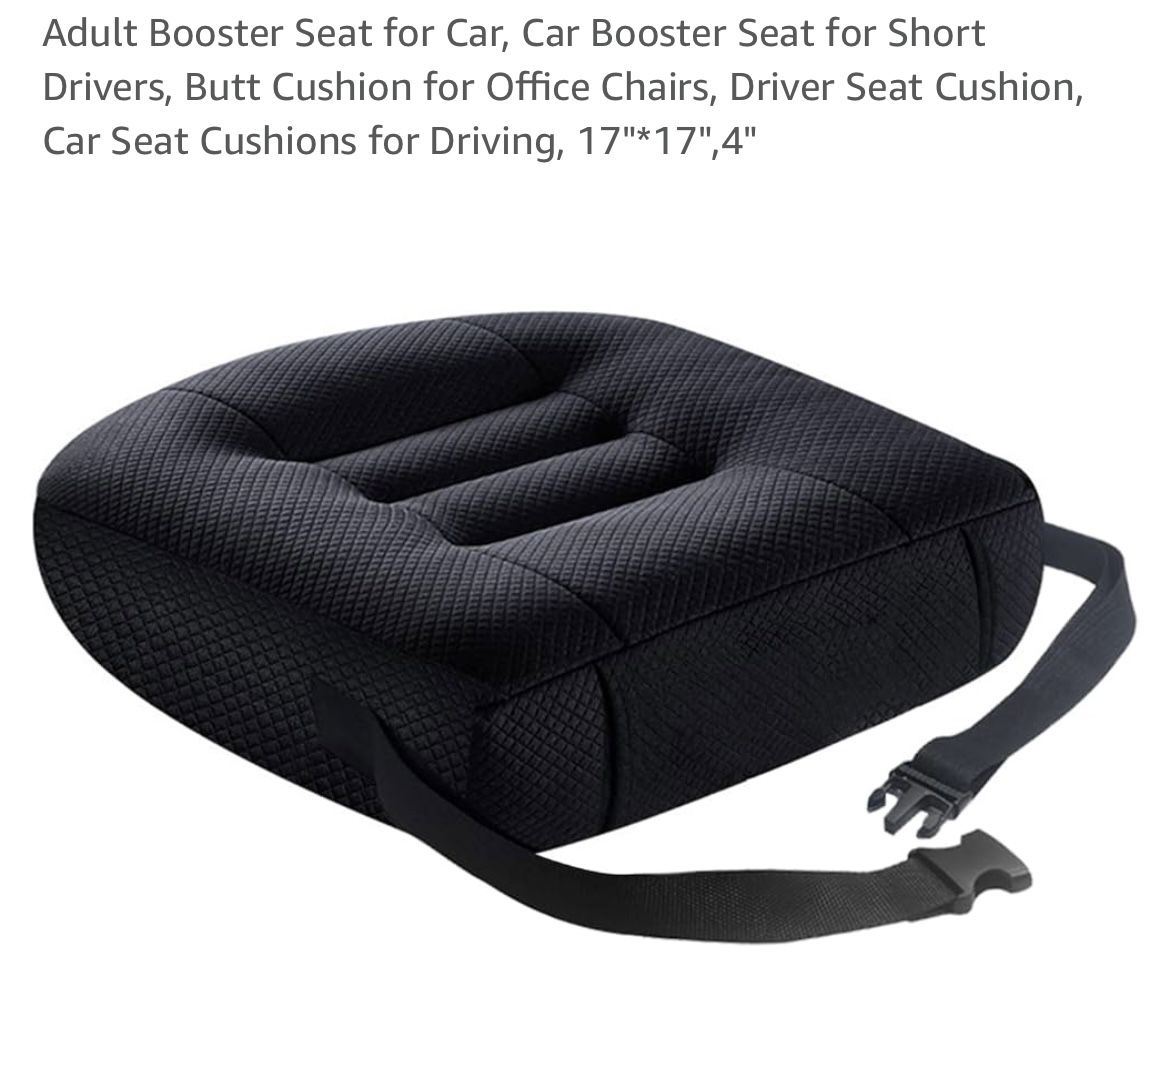 Adult Booster Seat for Car, Car Booster Seat for Short Drivers, Butt Cushion for Office Chairs, Driver Seat Cushion, Car Seat Cushions for Driving,